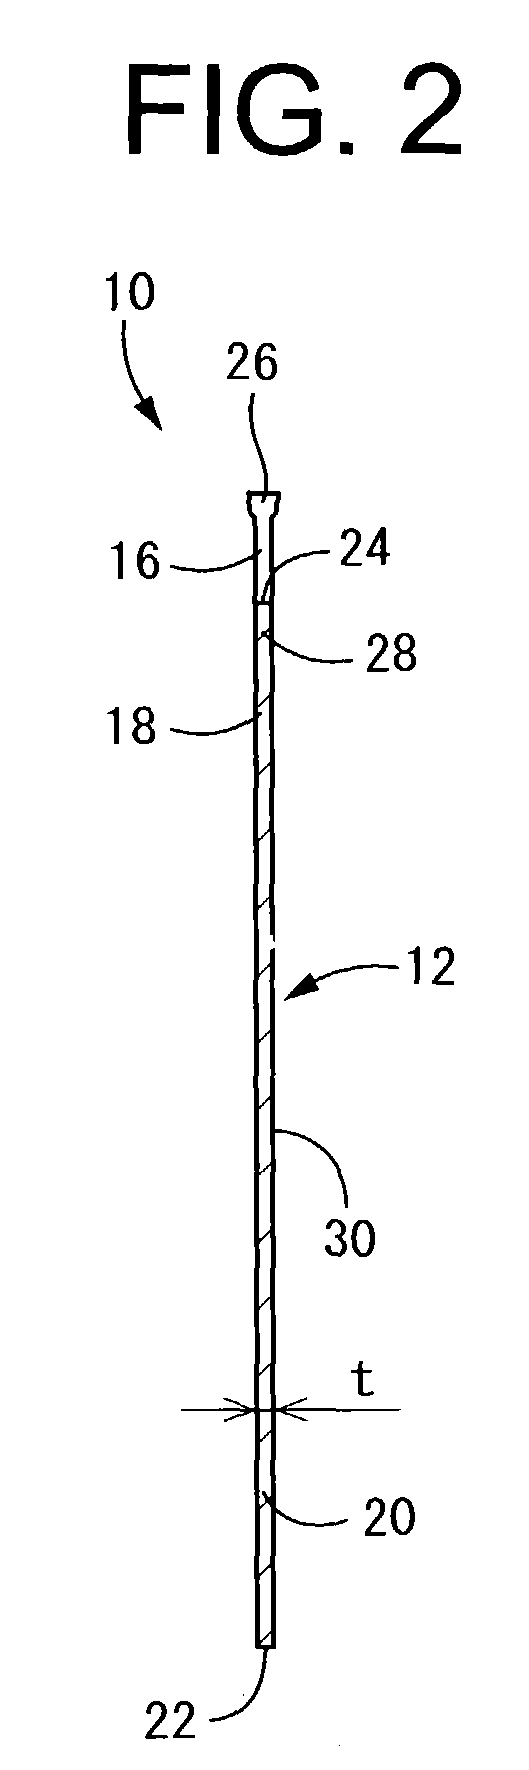 Band saw, band saw processing apparatus and band saw manufacturing method